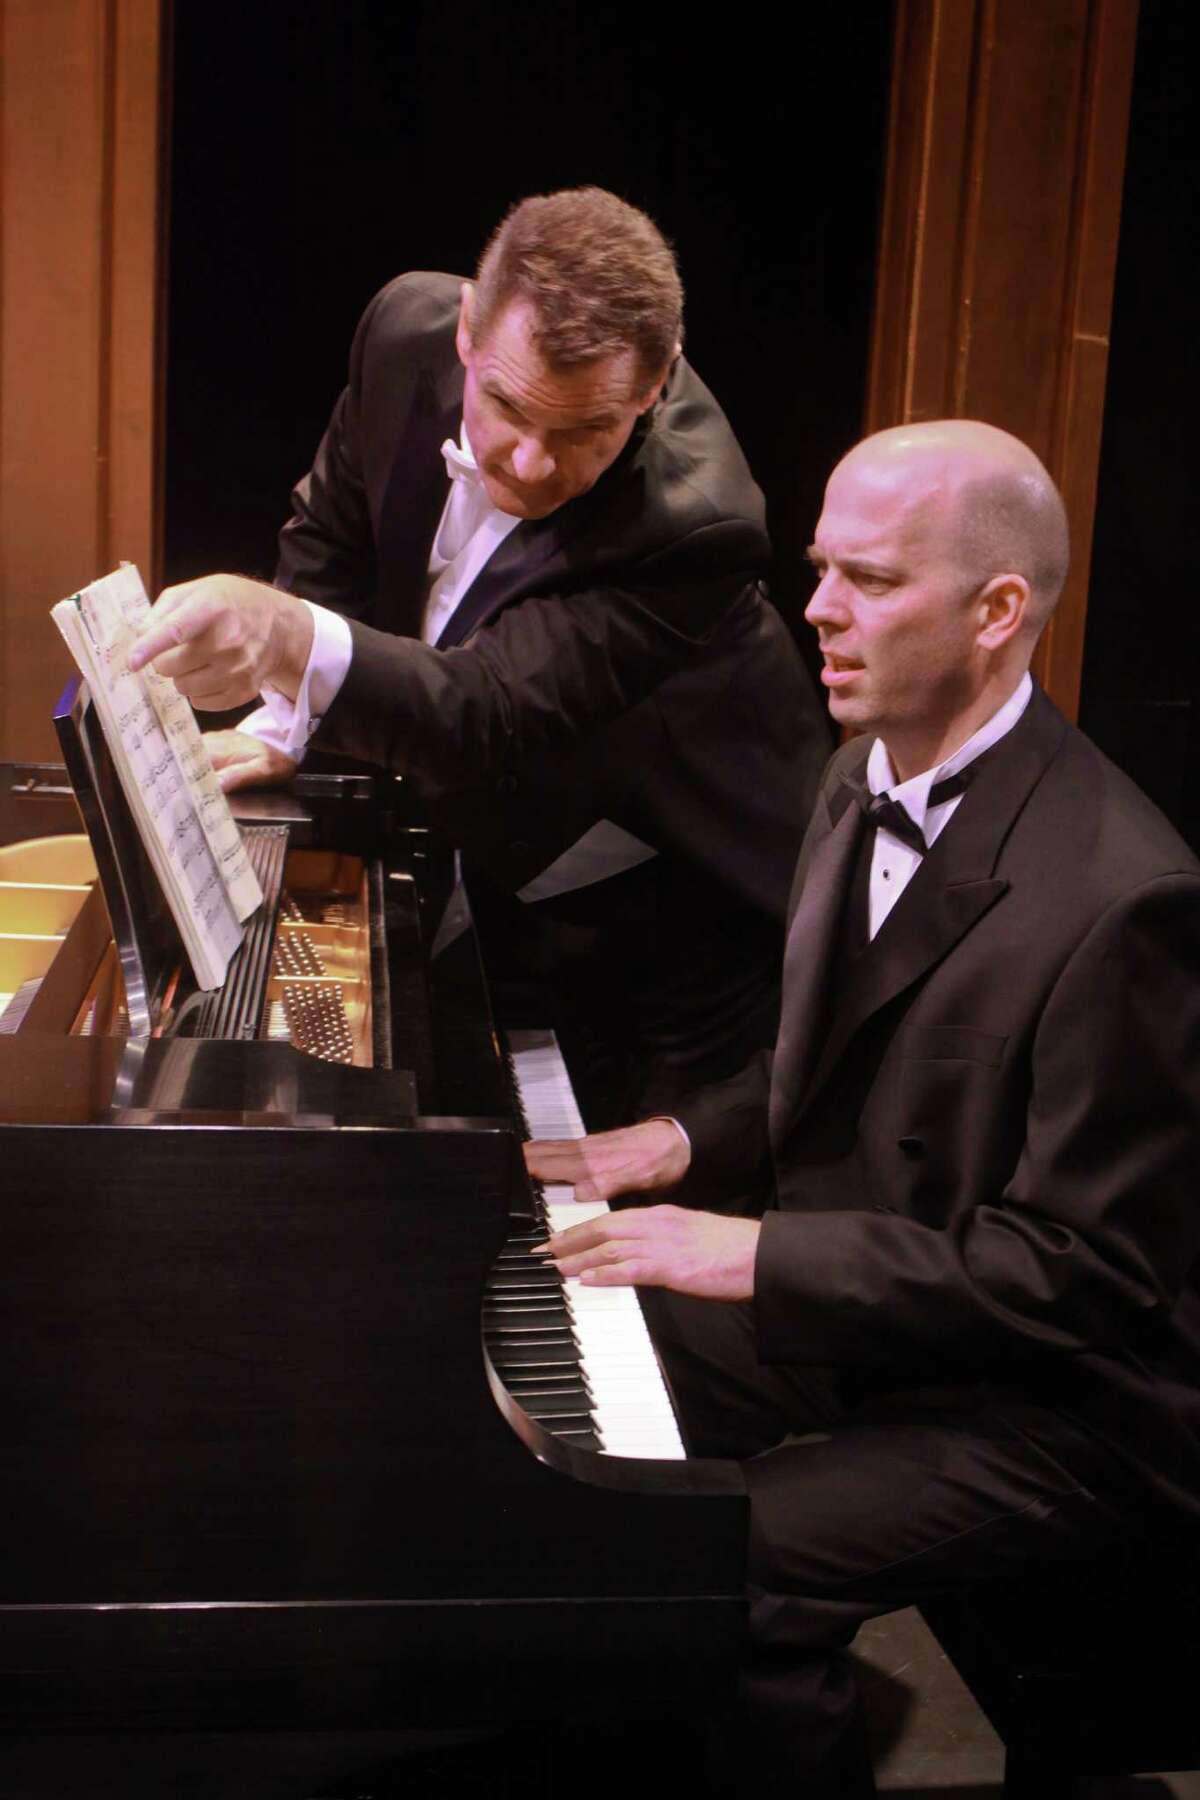 (For the Chronicle/Gary Fountain, September 2, 2012) Jeffrey Rockwell as Richard, left, and Tom Frey as Ted, in this scene from Stages' production "2 Pianos 4 Hands."